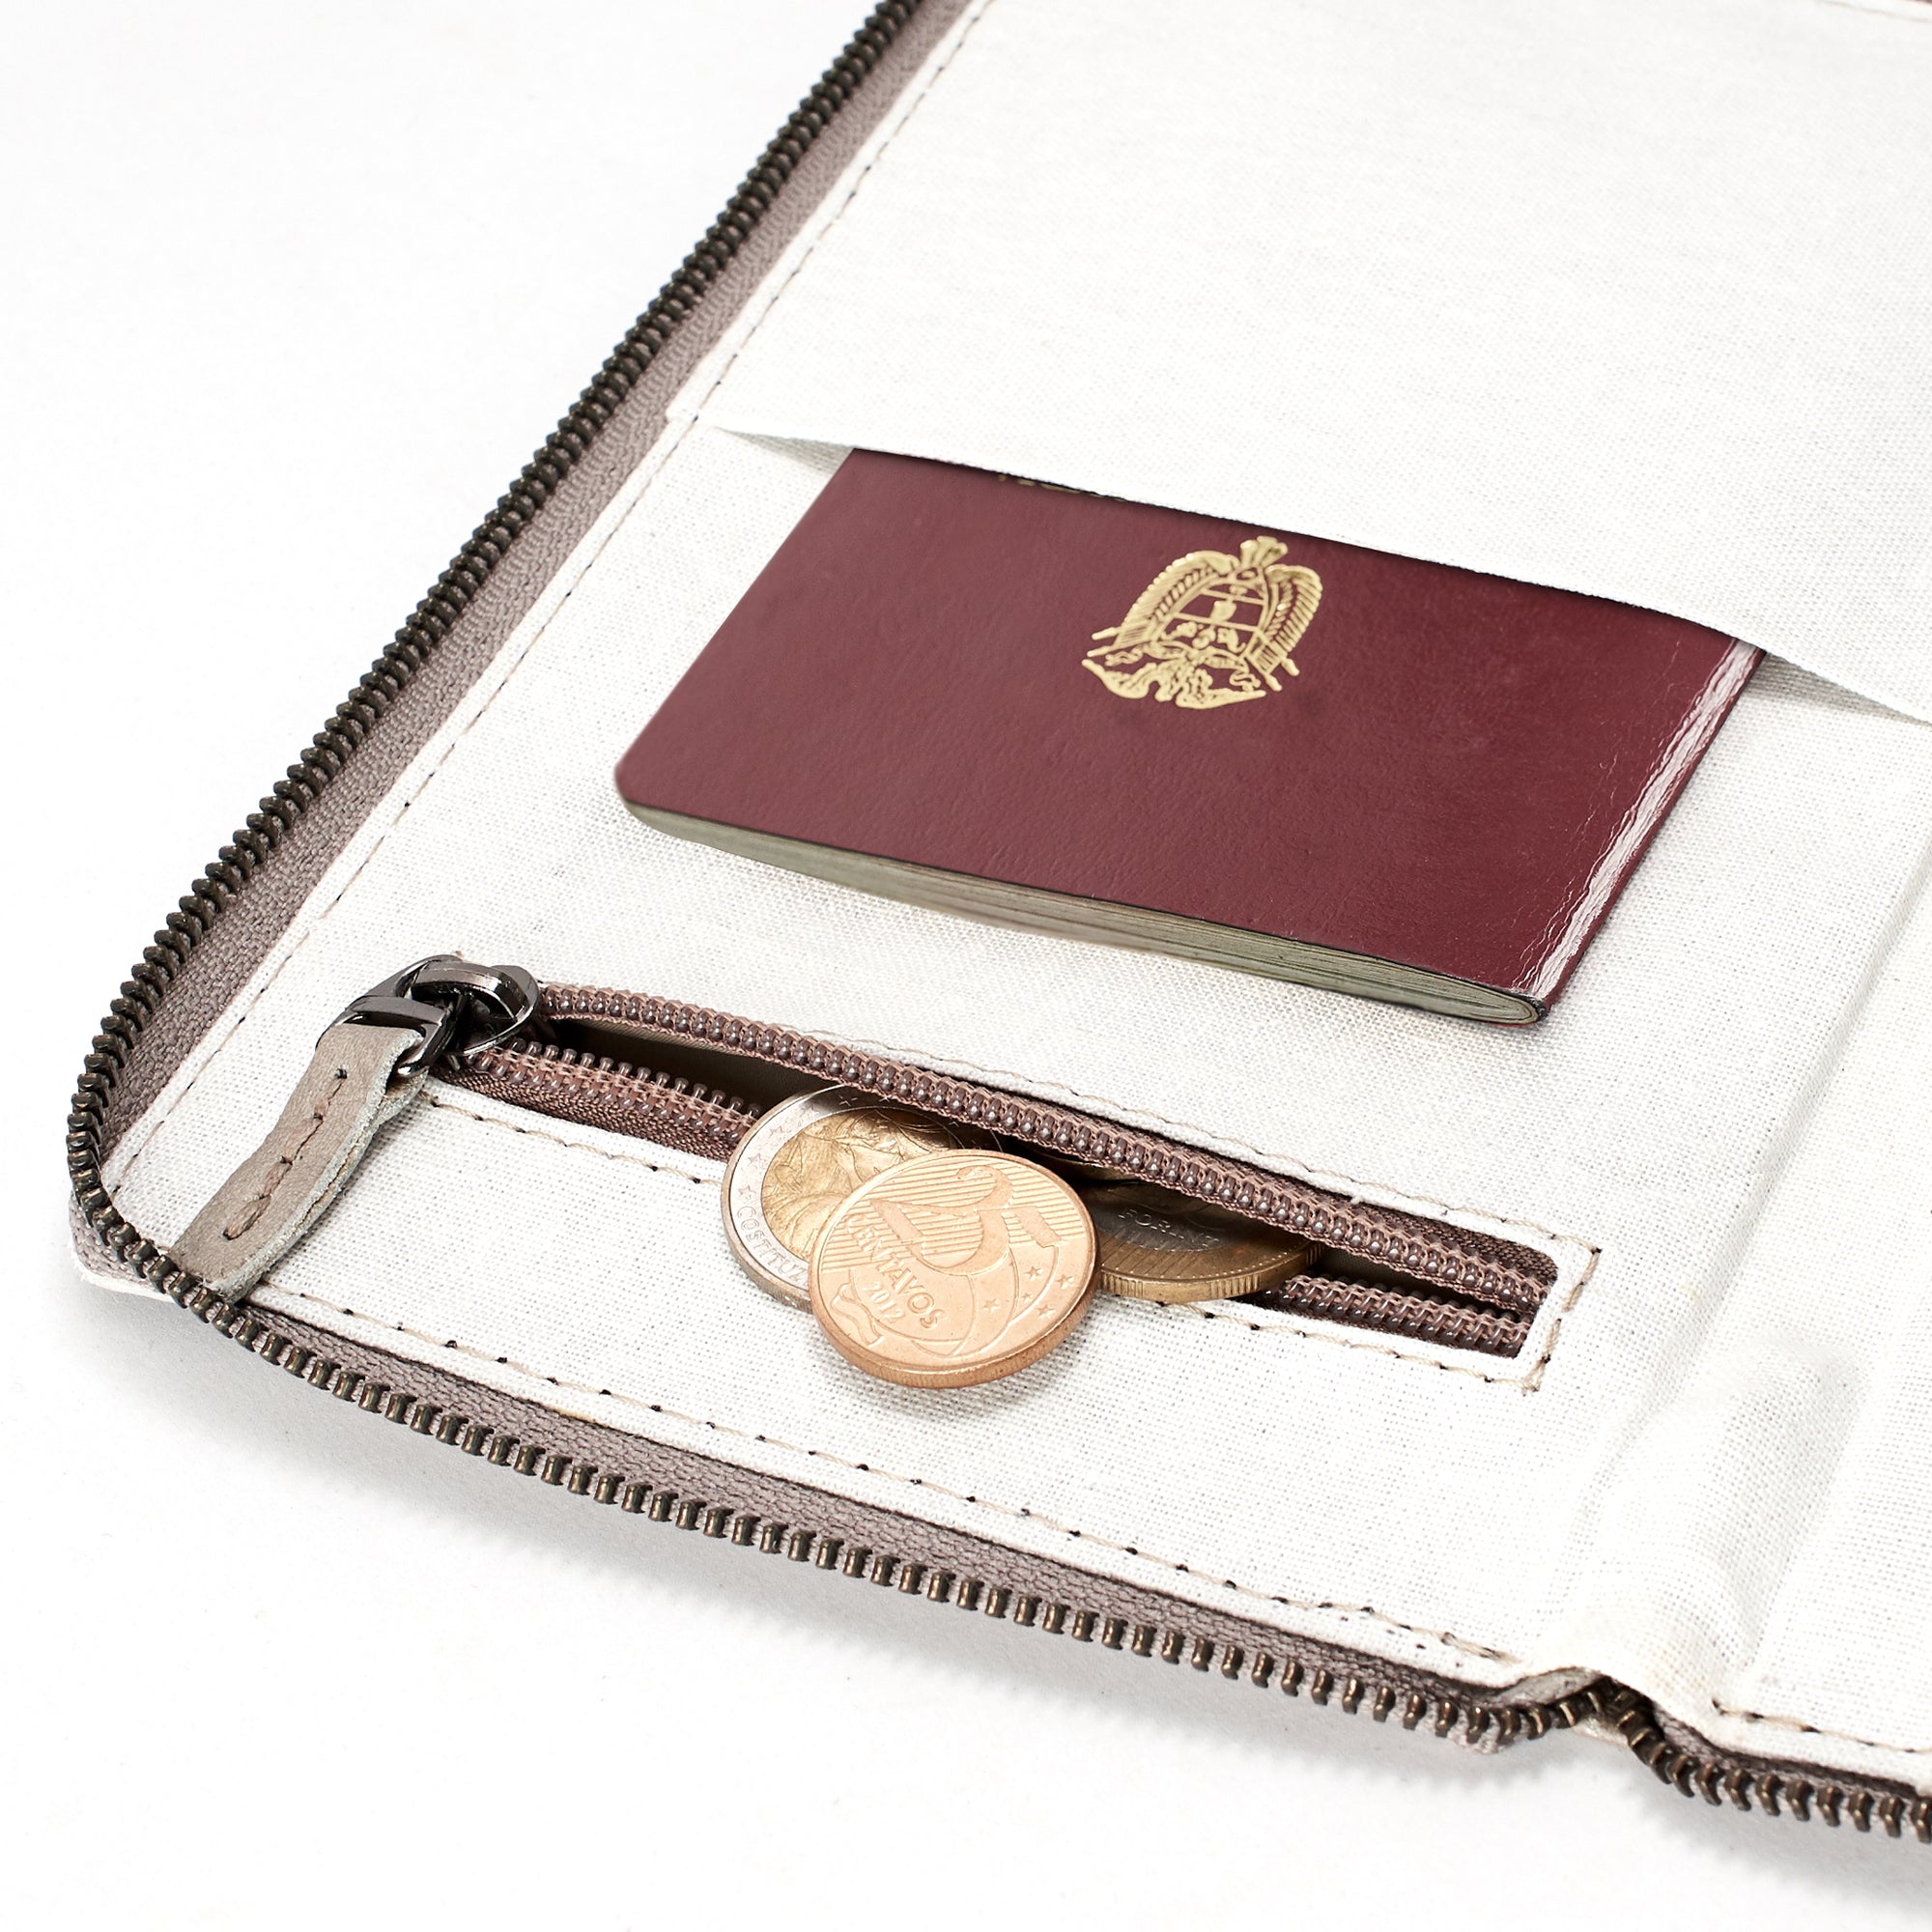 Coins pocket. Grey leather passport holder. Perfect for travelers. Gift for men. Personalized engraving. Handmade Leather wallet perfect money and card holder for trips